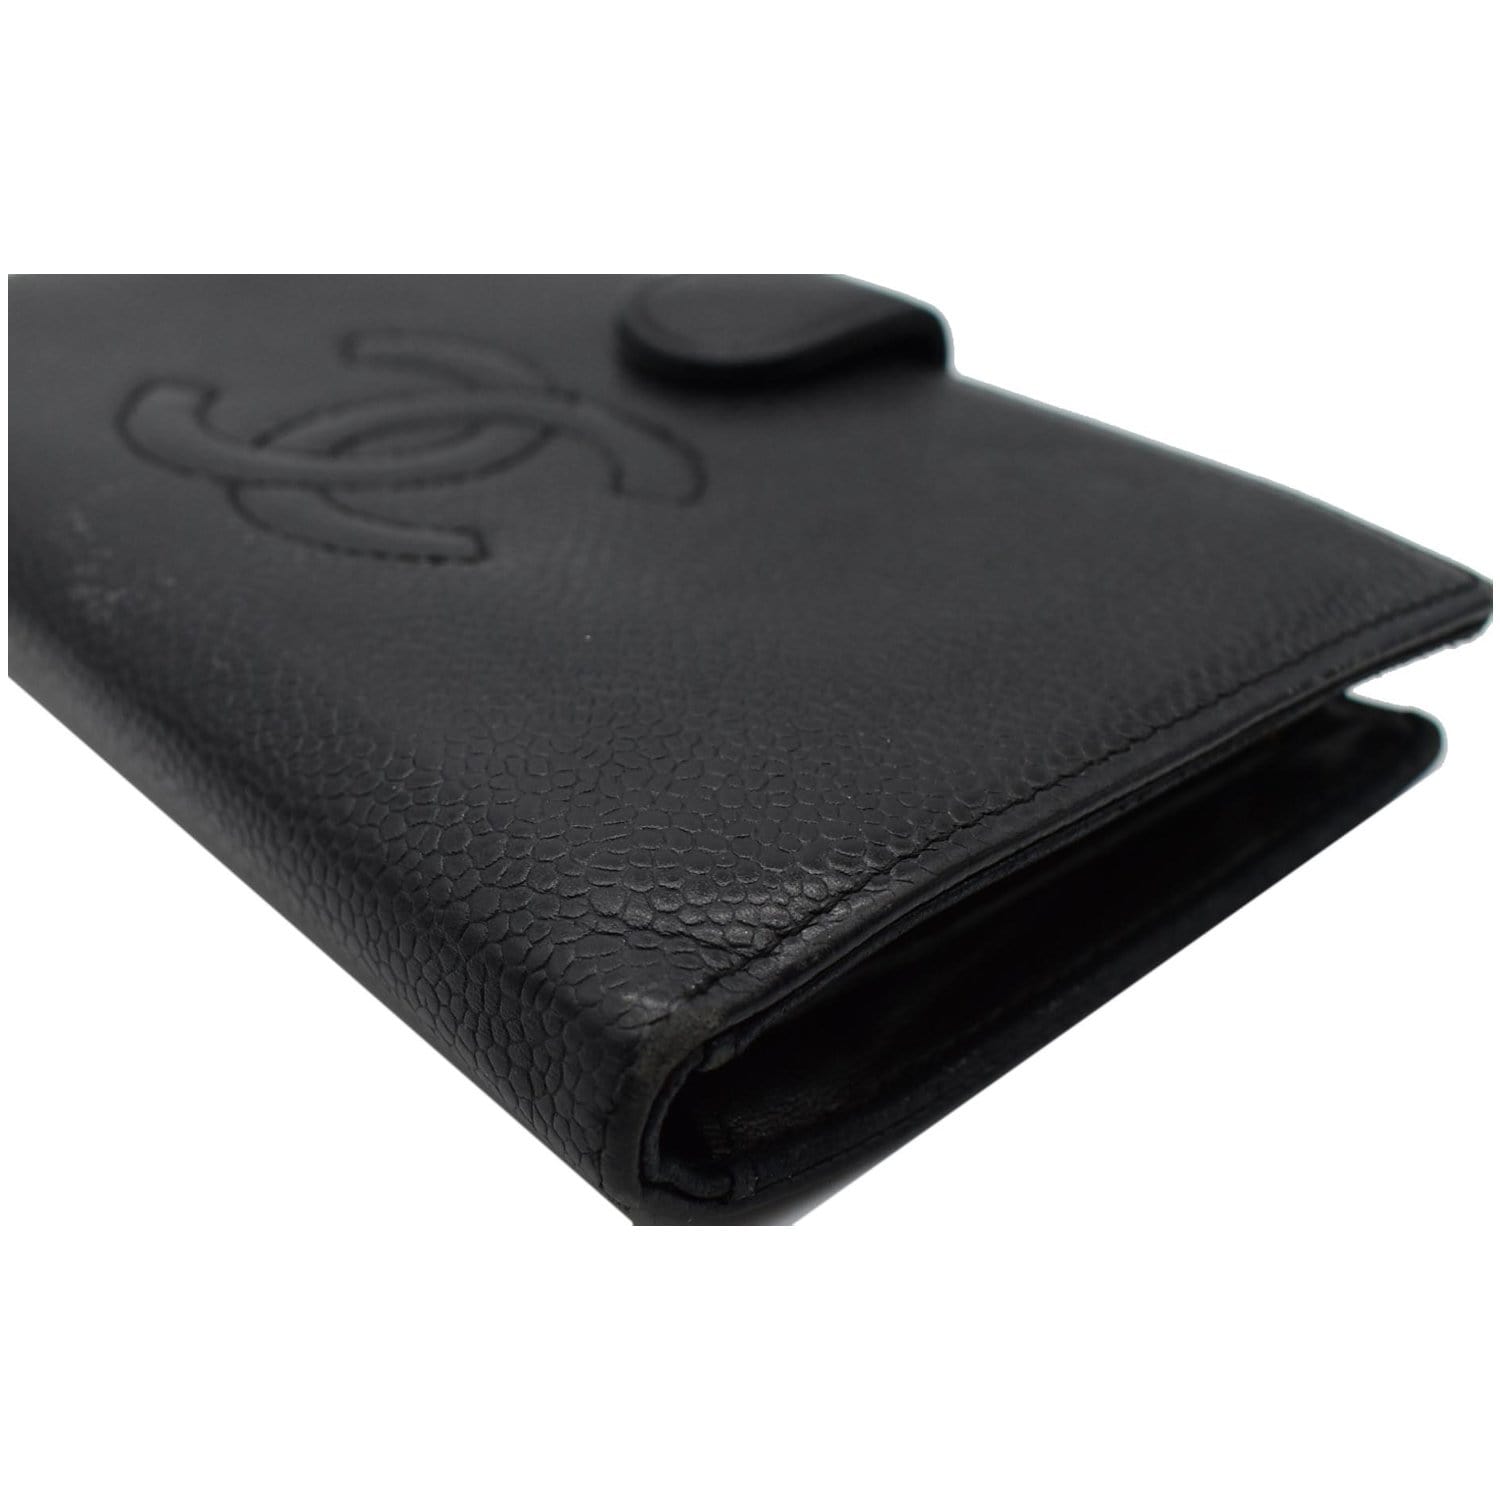 chanel small leather goods